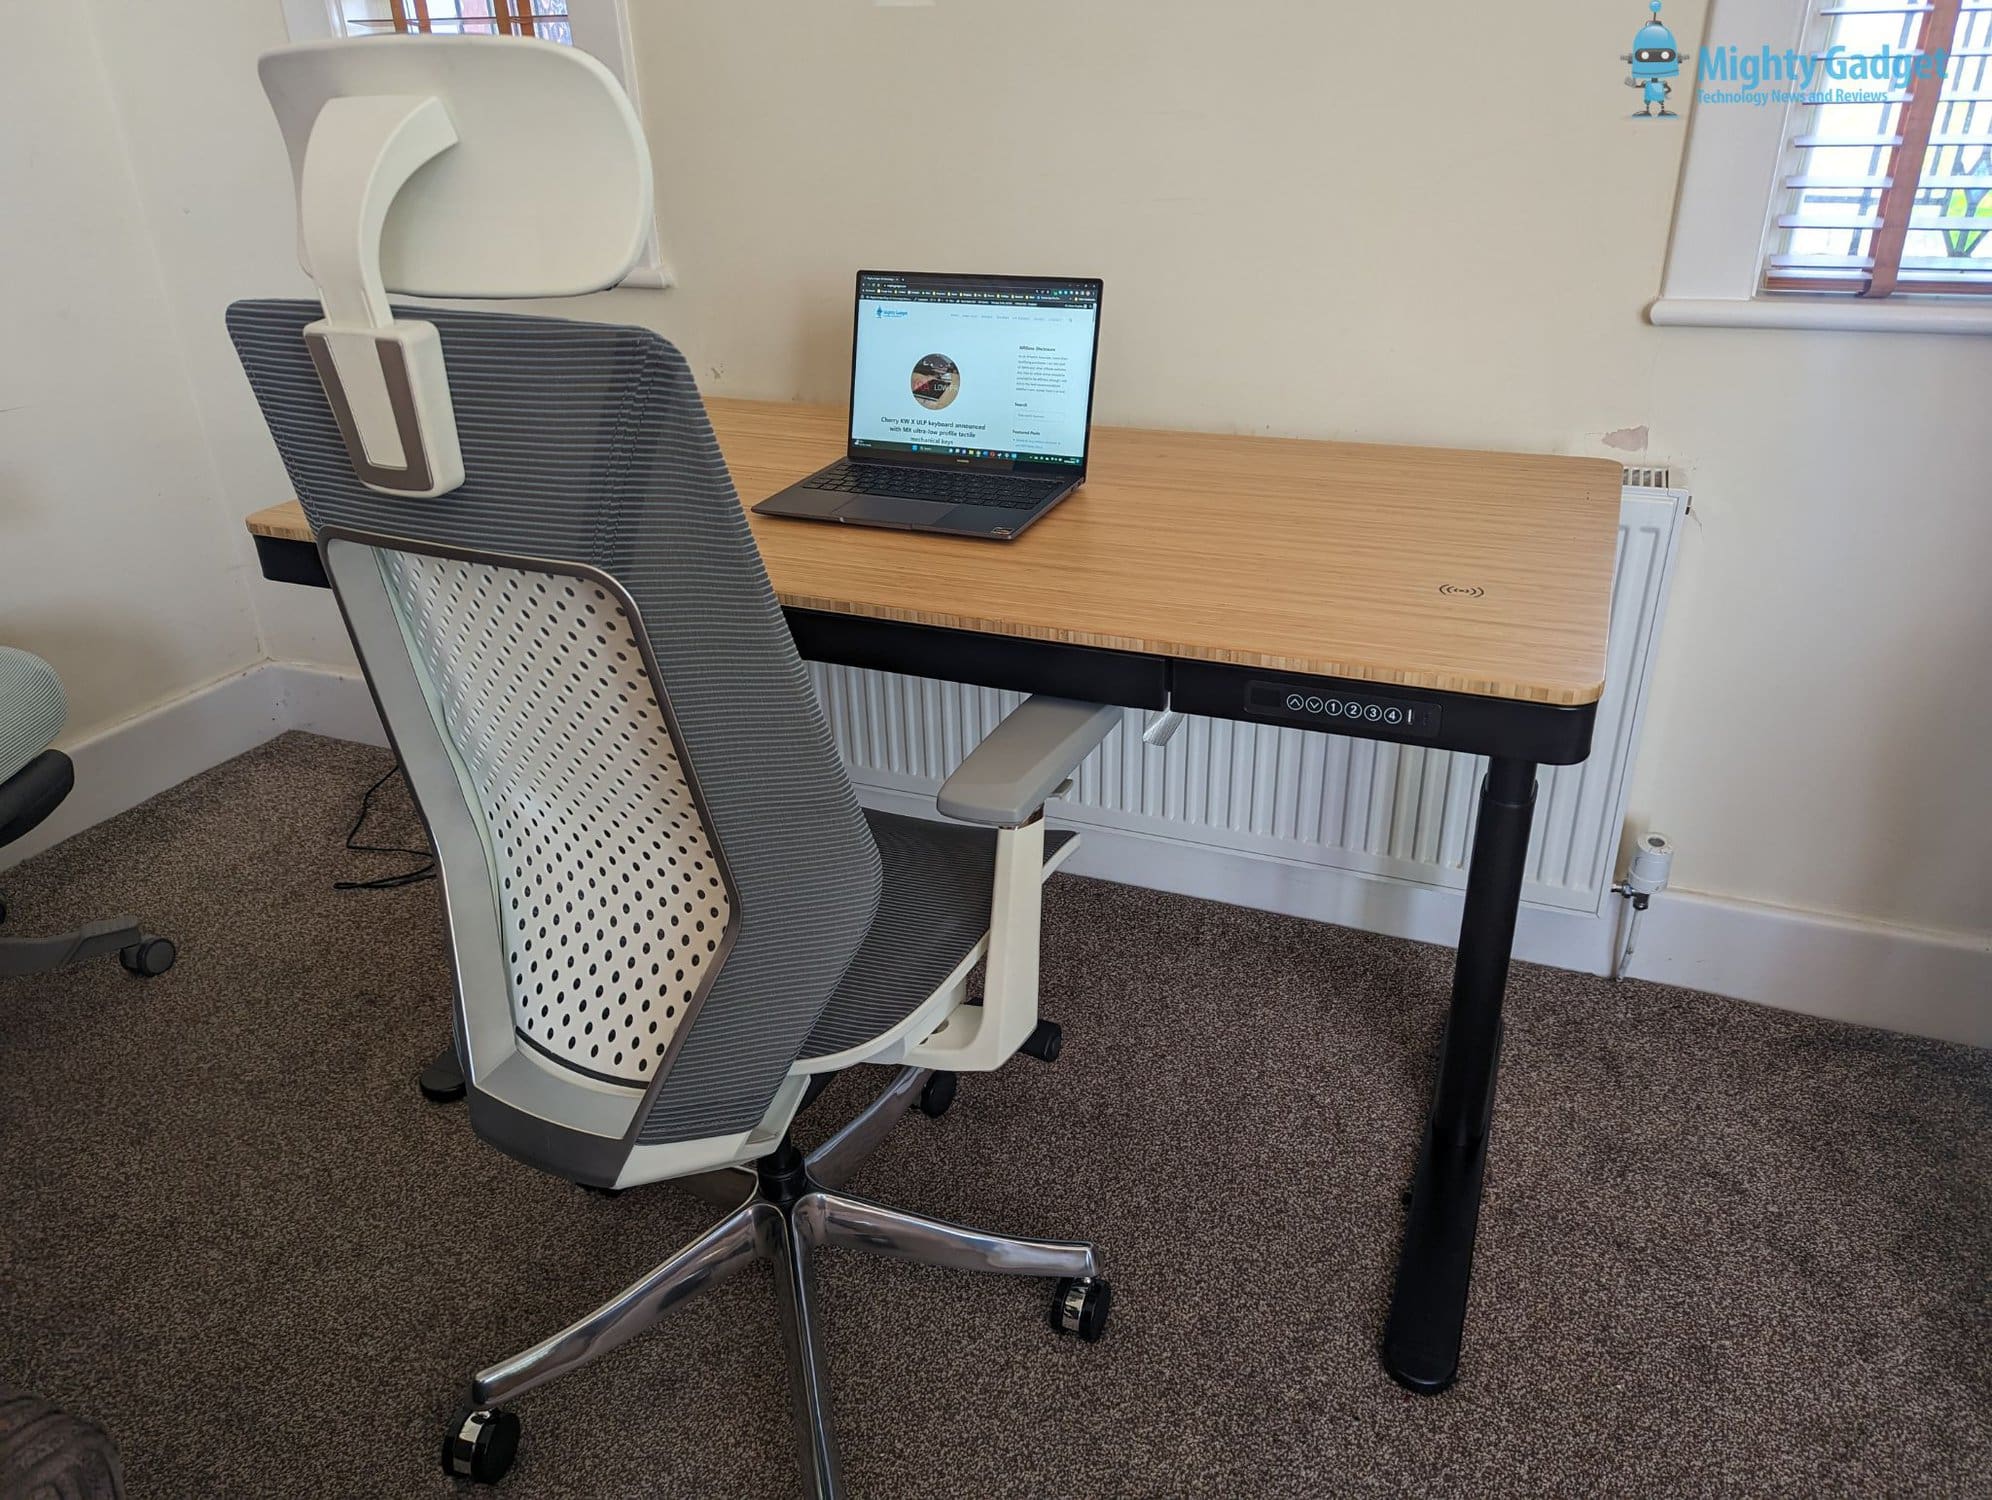 Flexispot BS11 Pro Chair Mesh Chair Review – Well worth the extra vs the BS9